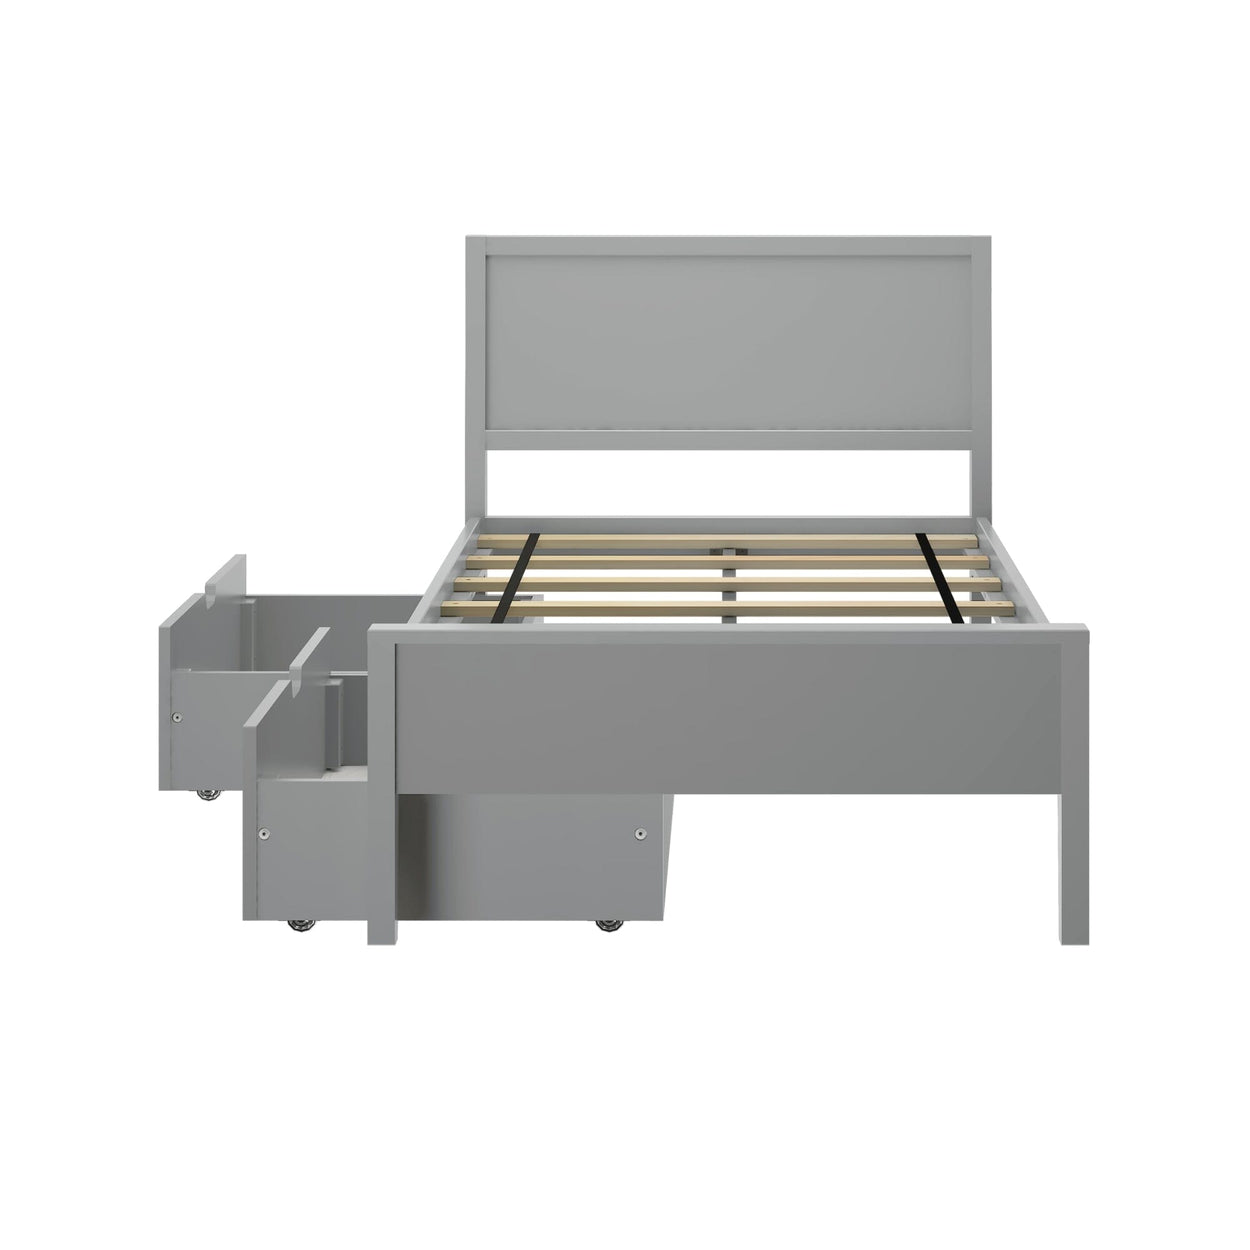 187100-121 : Kids Beds Classic Twin-Size Bed with Panel Headboard and Storage Drawers, Grey